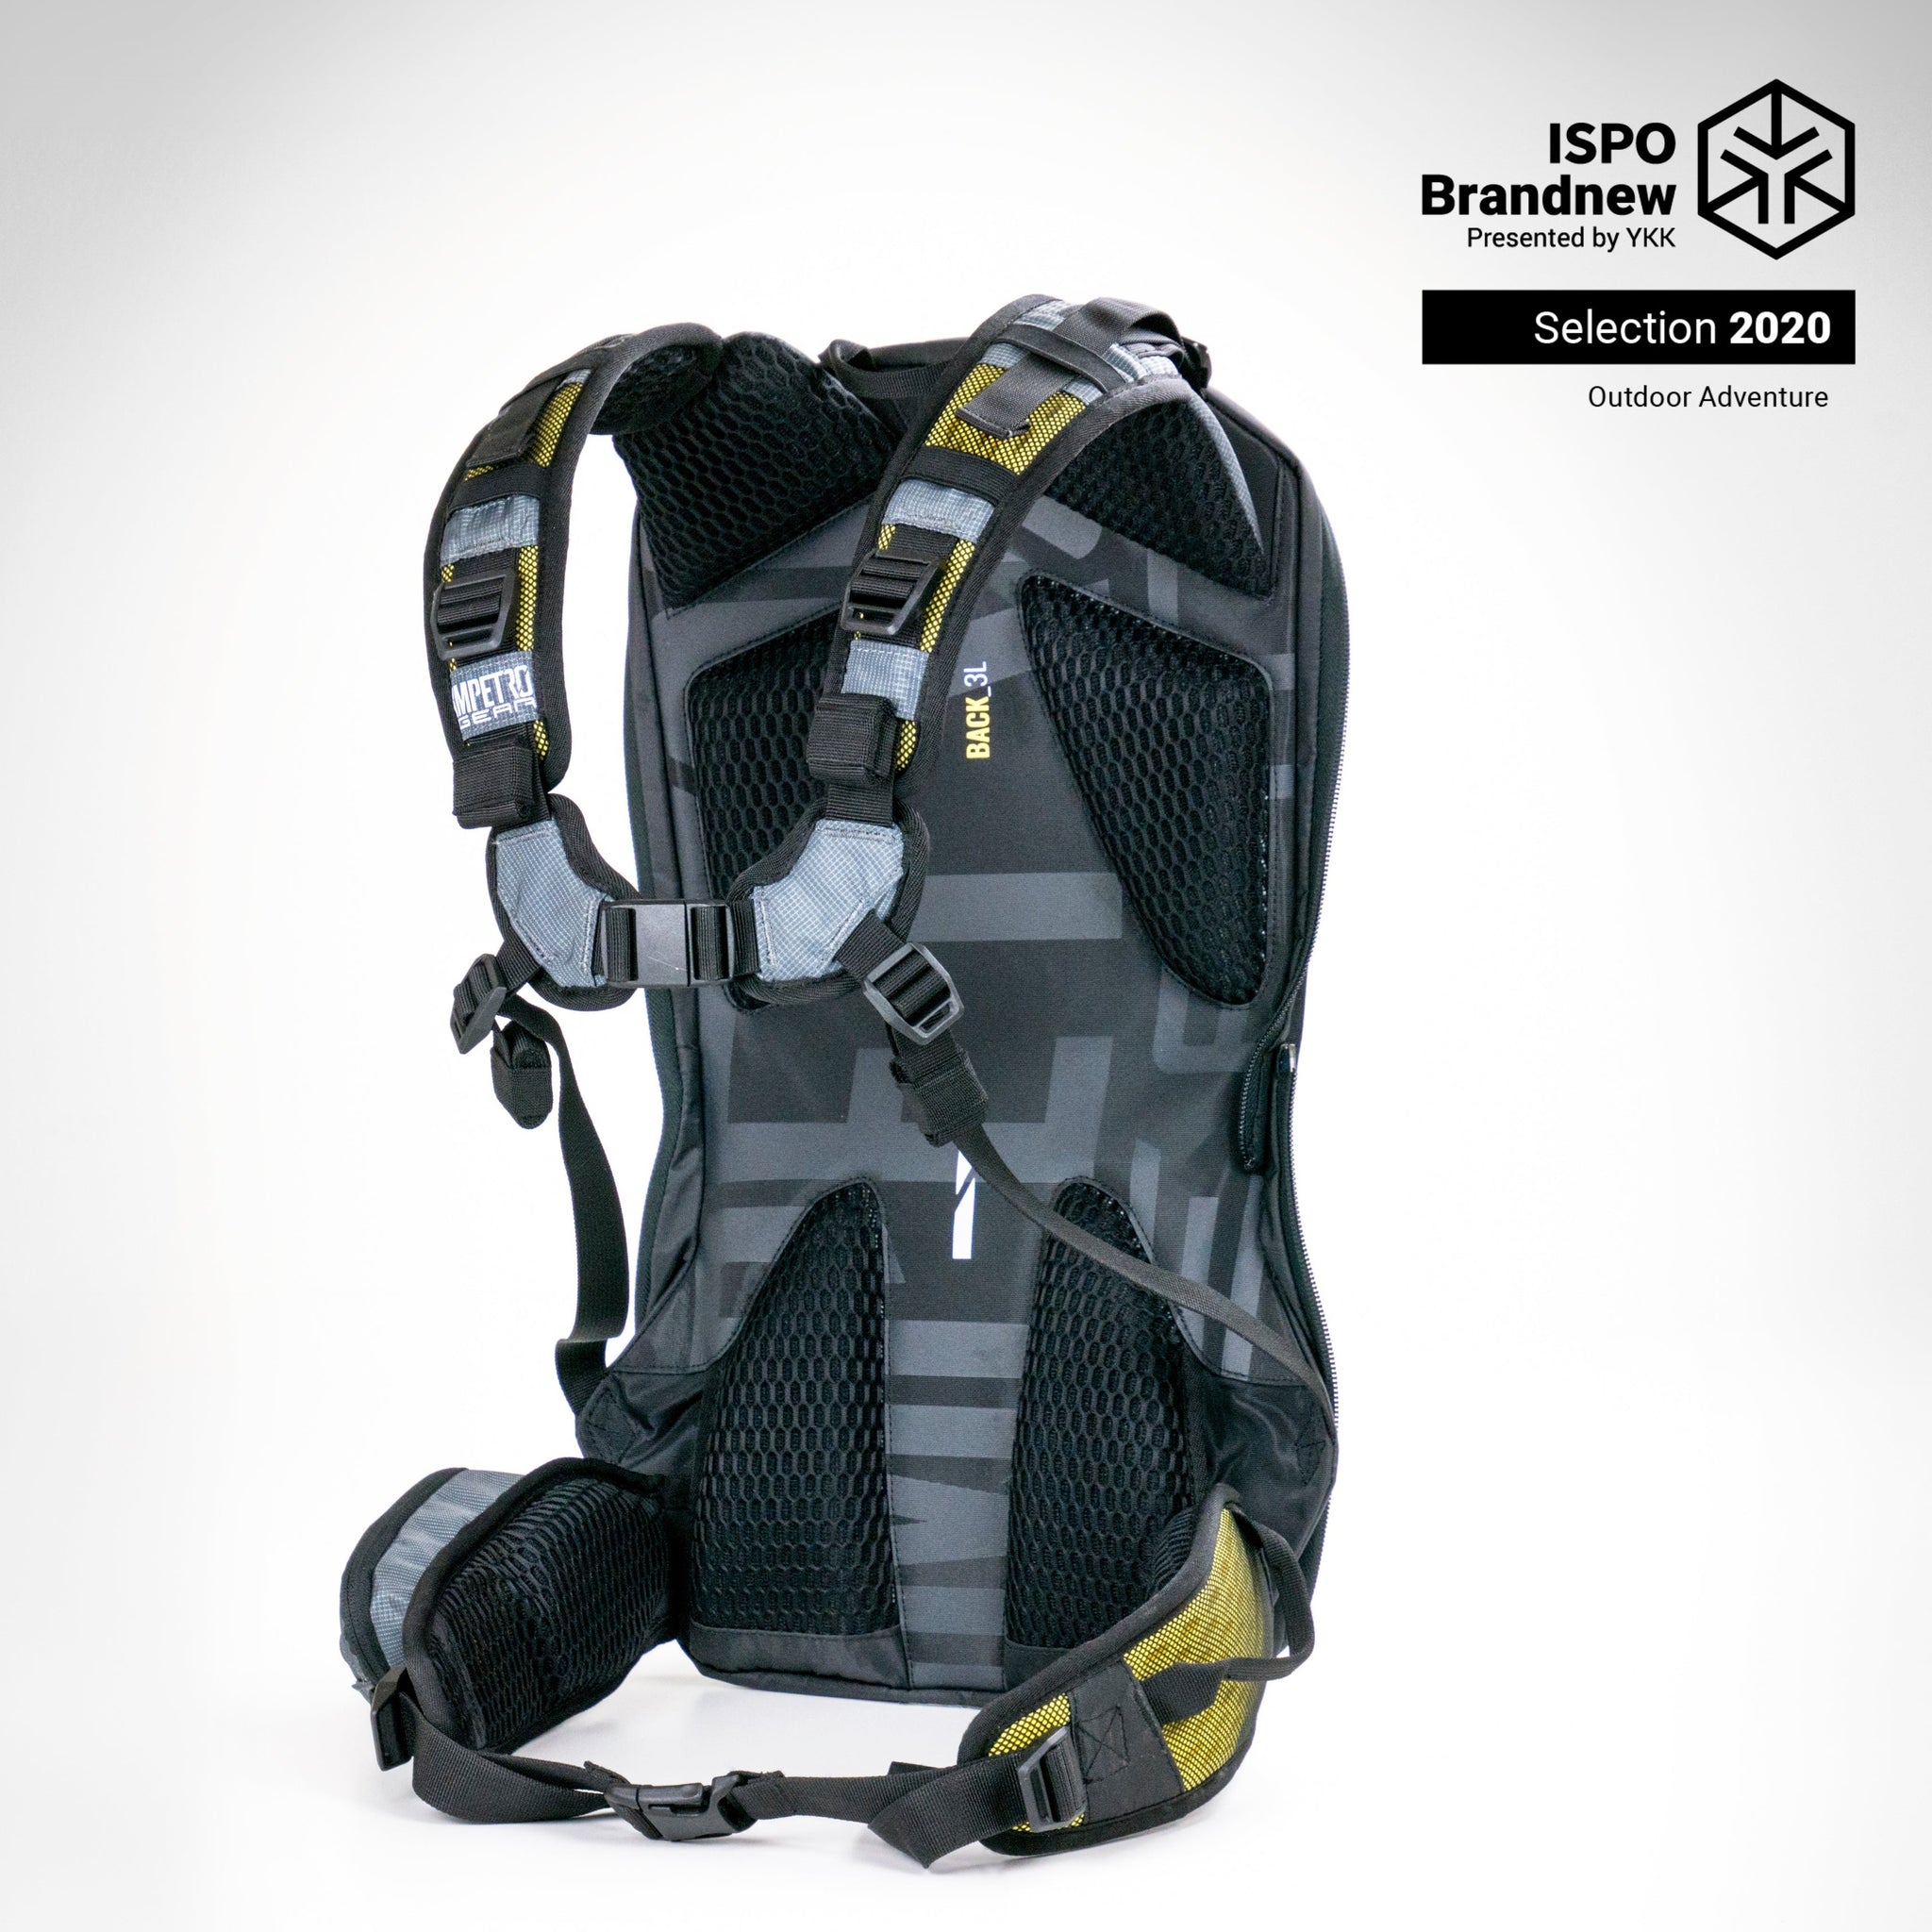 Solo Bundle (choice of 1 backpack)